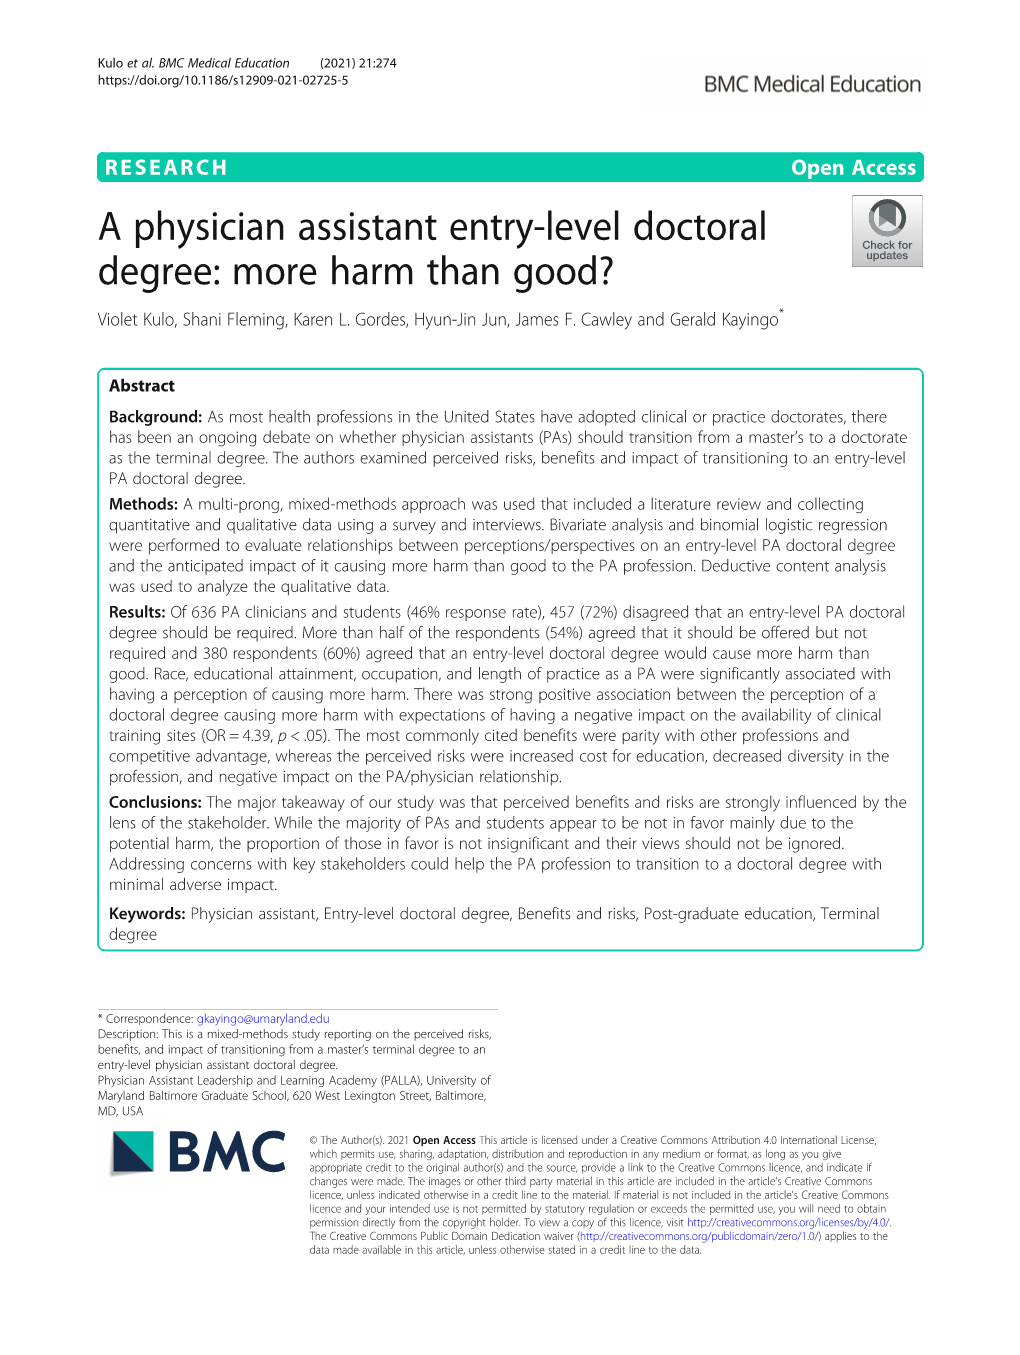 A Physician Assistant Entry-Level Doctoral Degree: More Harm Than Good? Violet Kulo, Shani Fleming, Karen L